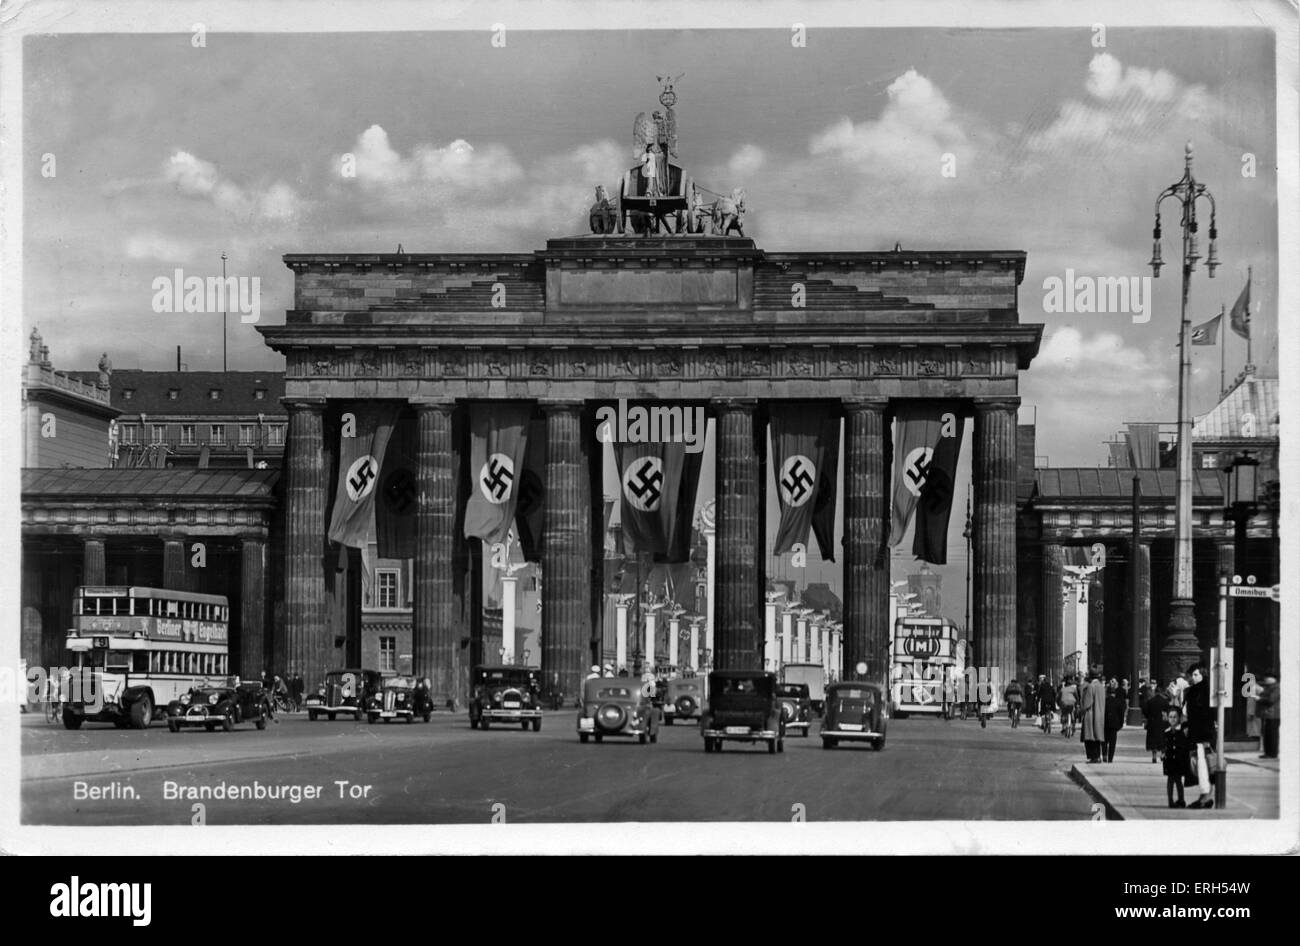 Berlin, Germany:The Brandenburg Gate / Brandenburger Tor. Nazi party flags cover the city gate. Postcard stamped on rear 7 July 1941. The Brandenburg Gate was commissioned by King Frederick William II of Prussia (25 September 1744 – 16 November 1797) and originally built by architect Carl Gotthard Langhans (Prussian architect, 15 December 1732 – 1 October 1808) from 1788 to 1791. Stock Photo